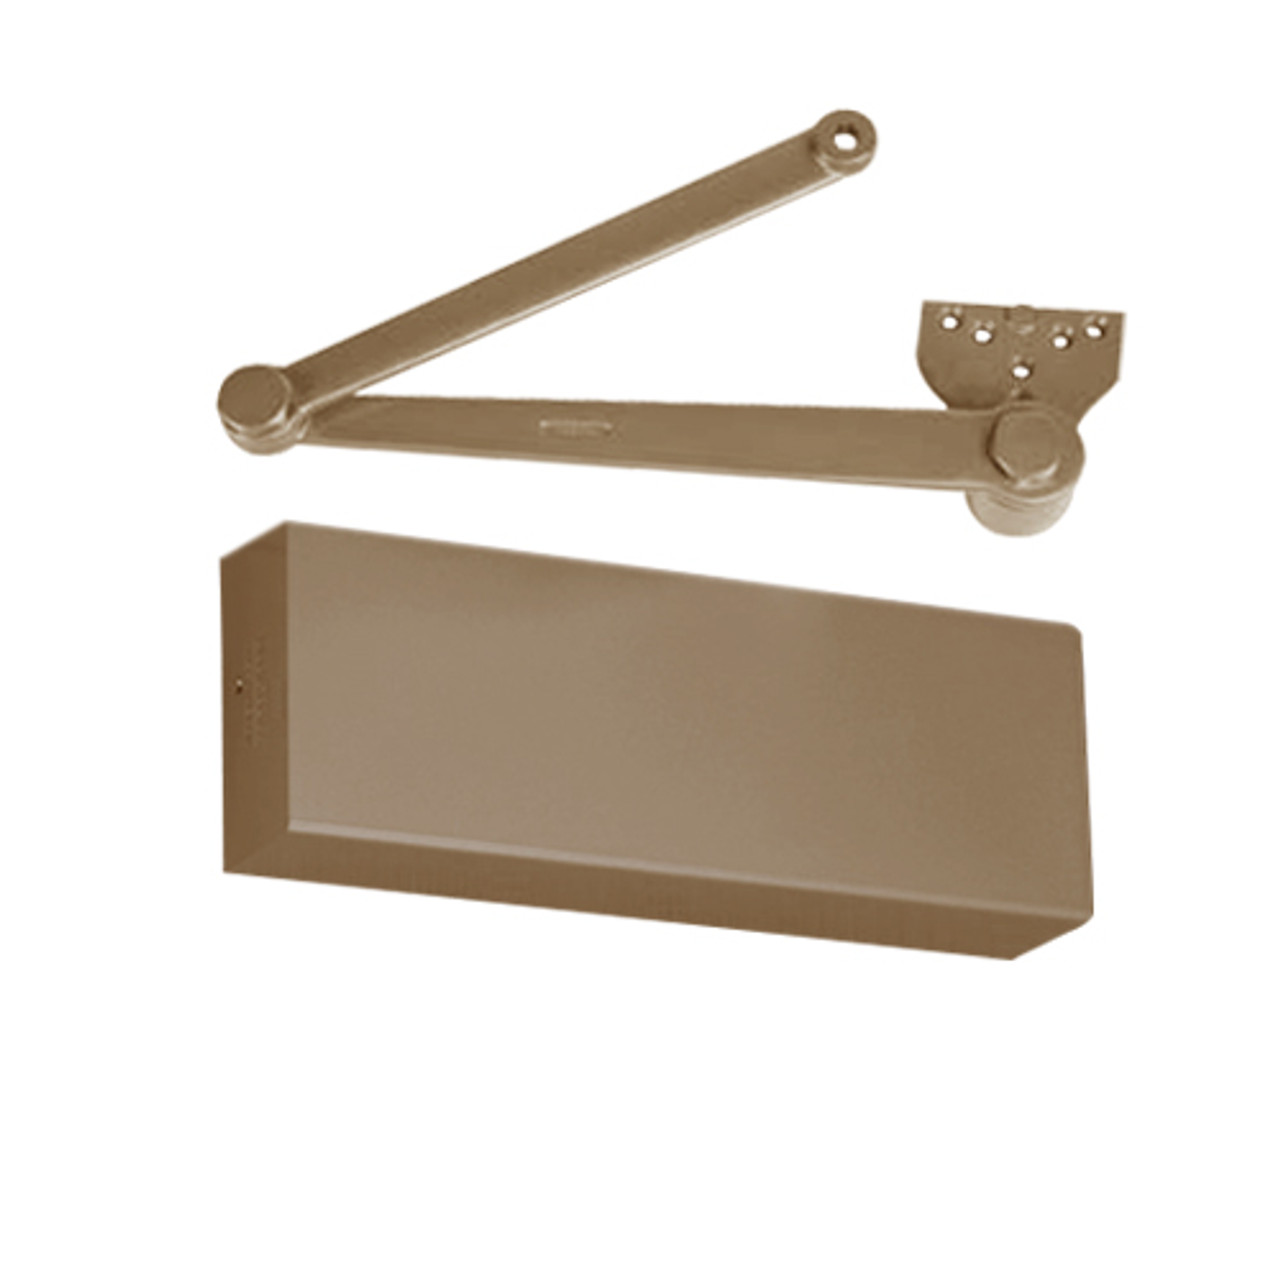 PRO9500M-691 Norton 9500 Series Non-Hold Open Cast Iron Door Closer with Parallel Rigid Offset Arm in Dull Bronze Finish